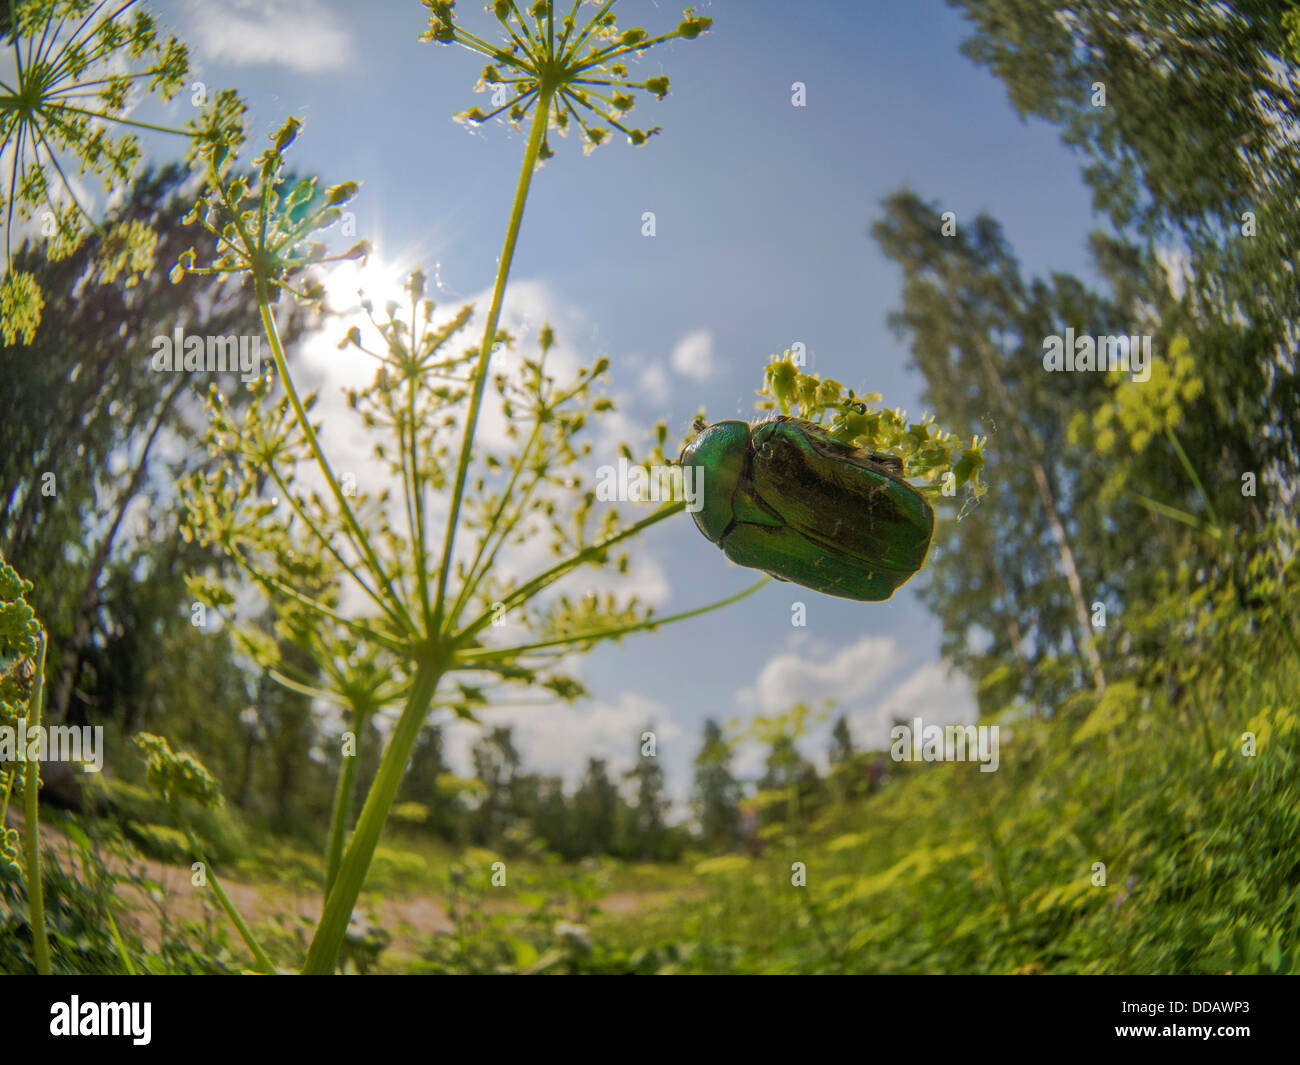 Chafer beetle on a flower Stock Photo